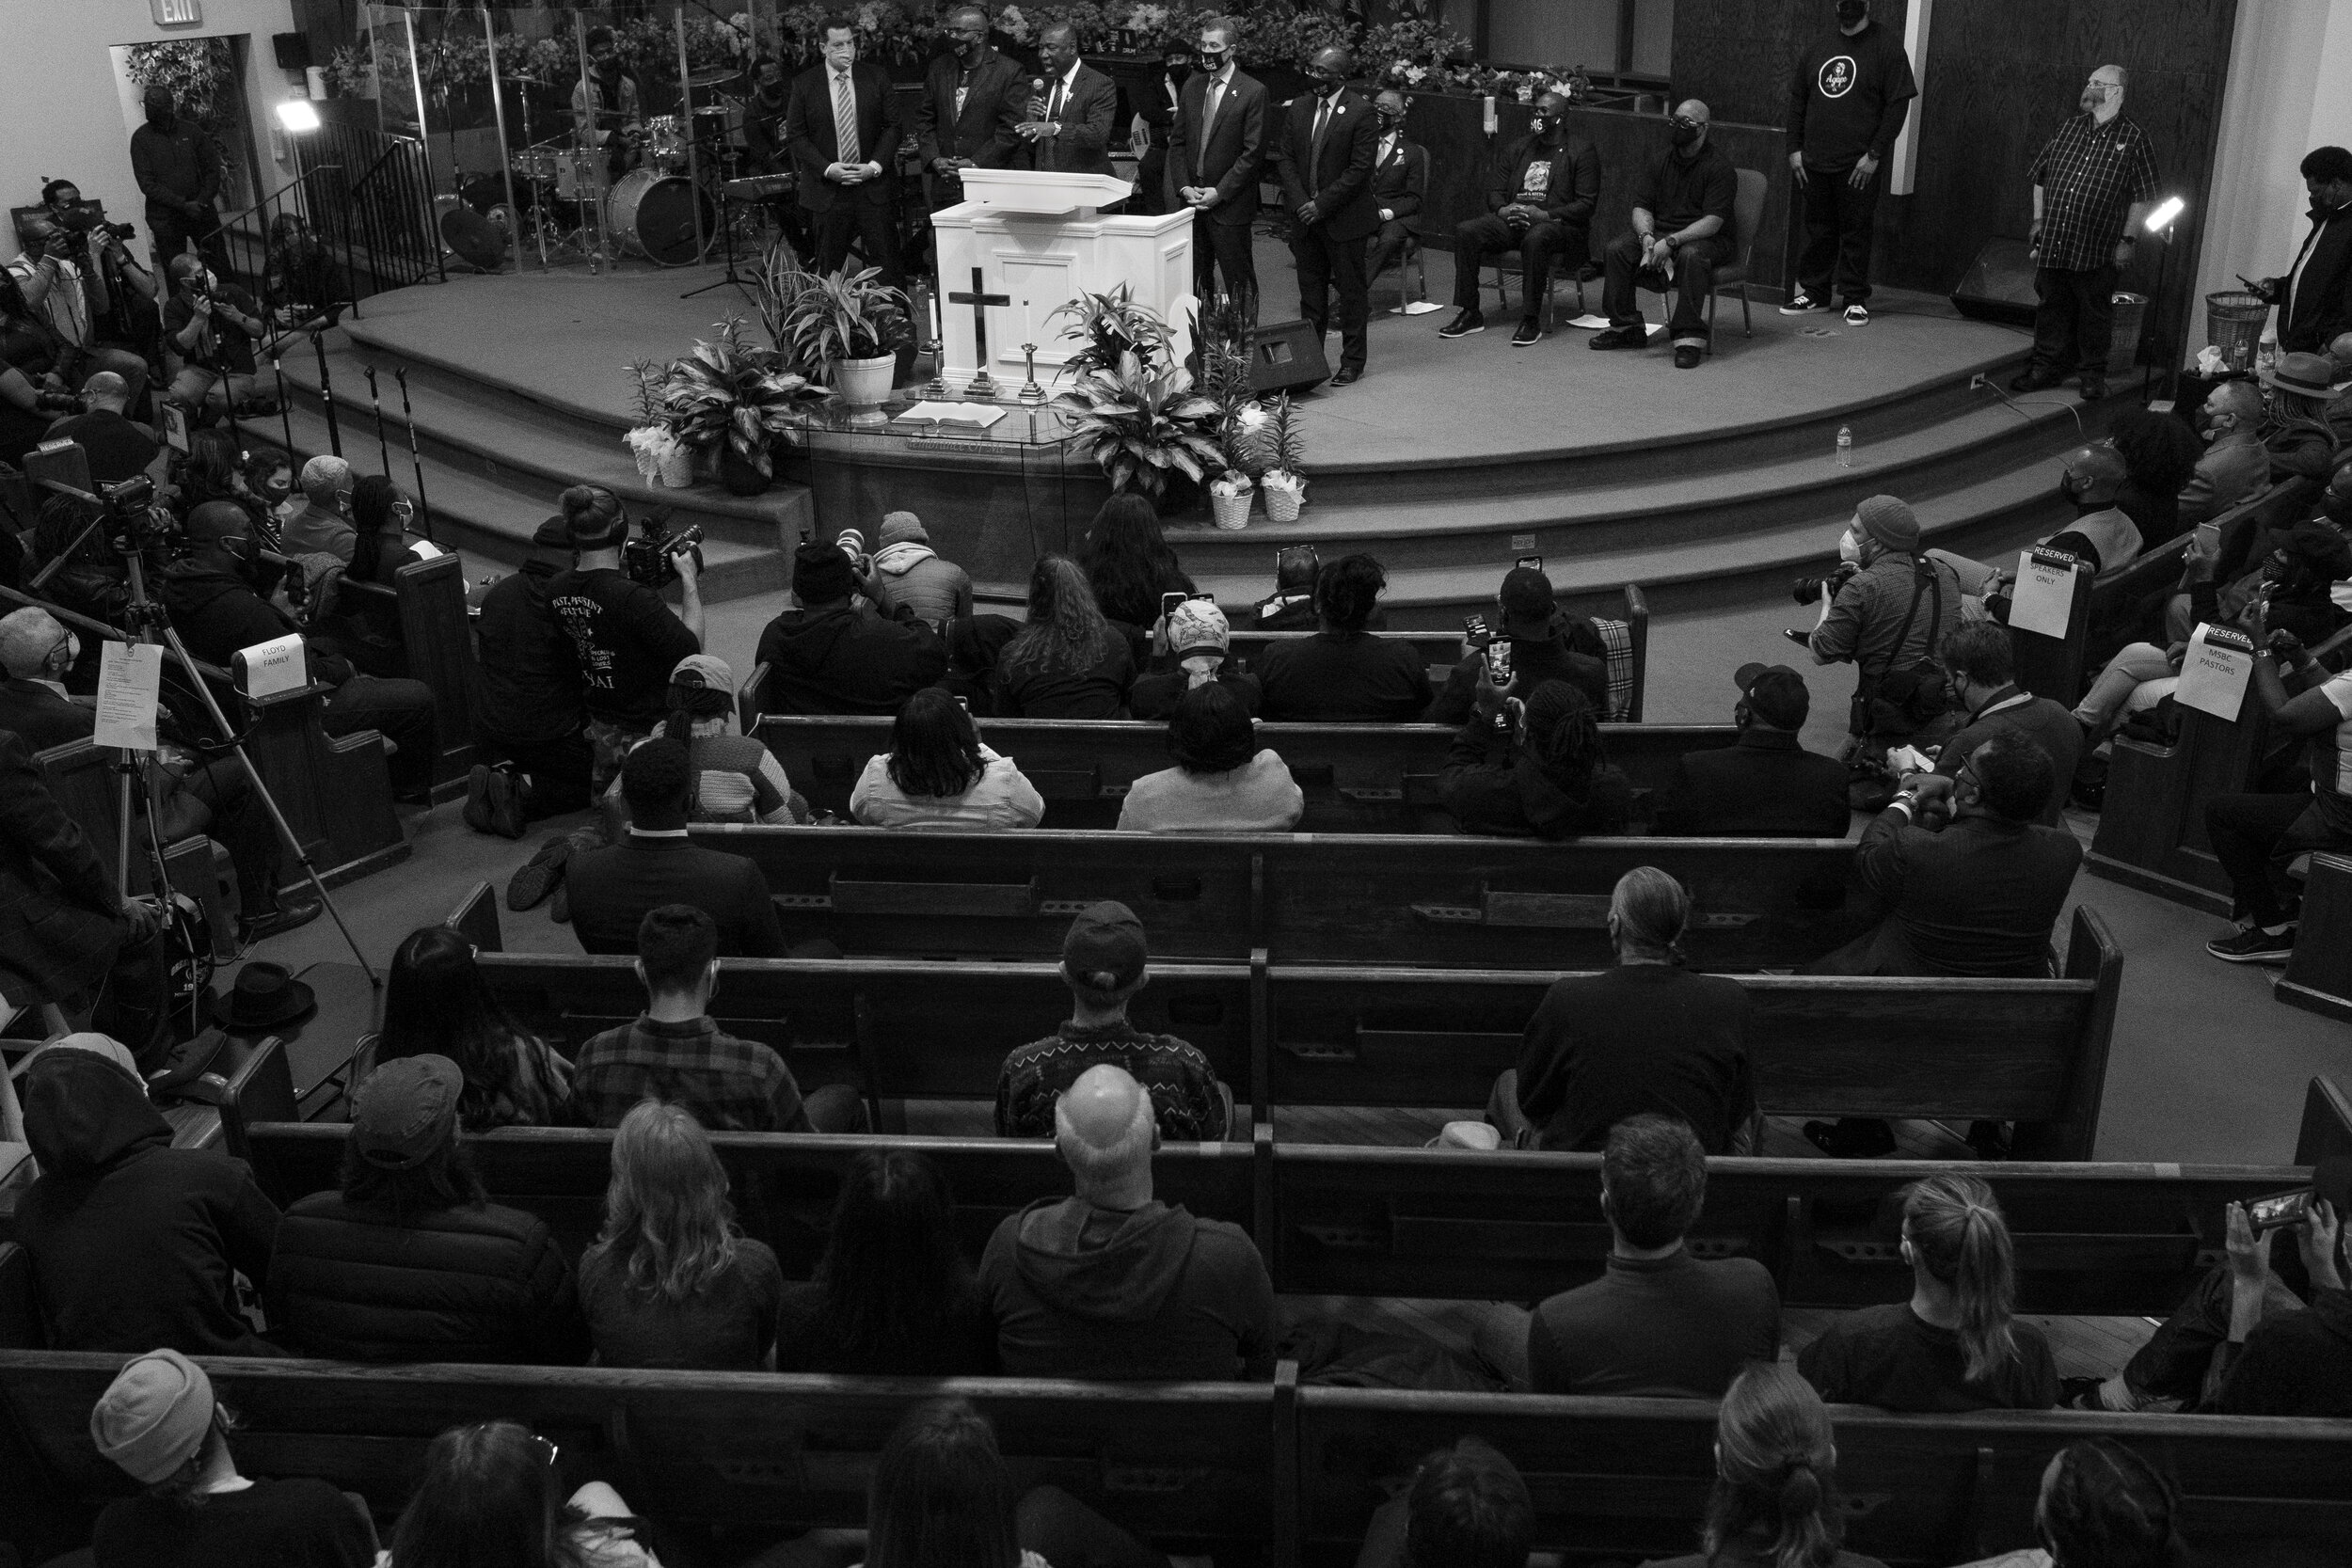  Attorney Ben Crump, who is representing George Floyd’s family, speaks to the congregation and community members during a rally and vigil to honor George Floyd inside Greater Friendship Missionary Church in Minneapolis on Sunday, March 28th before op